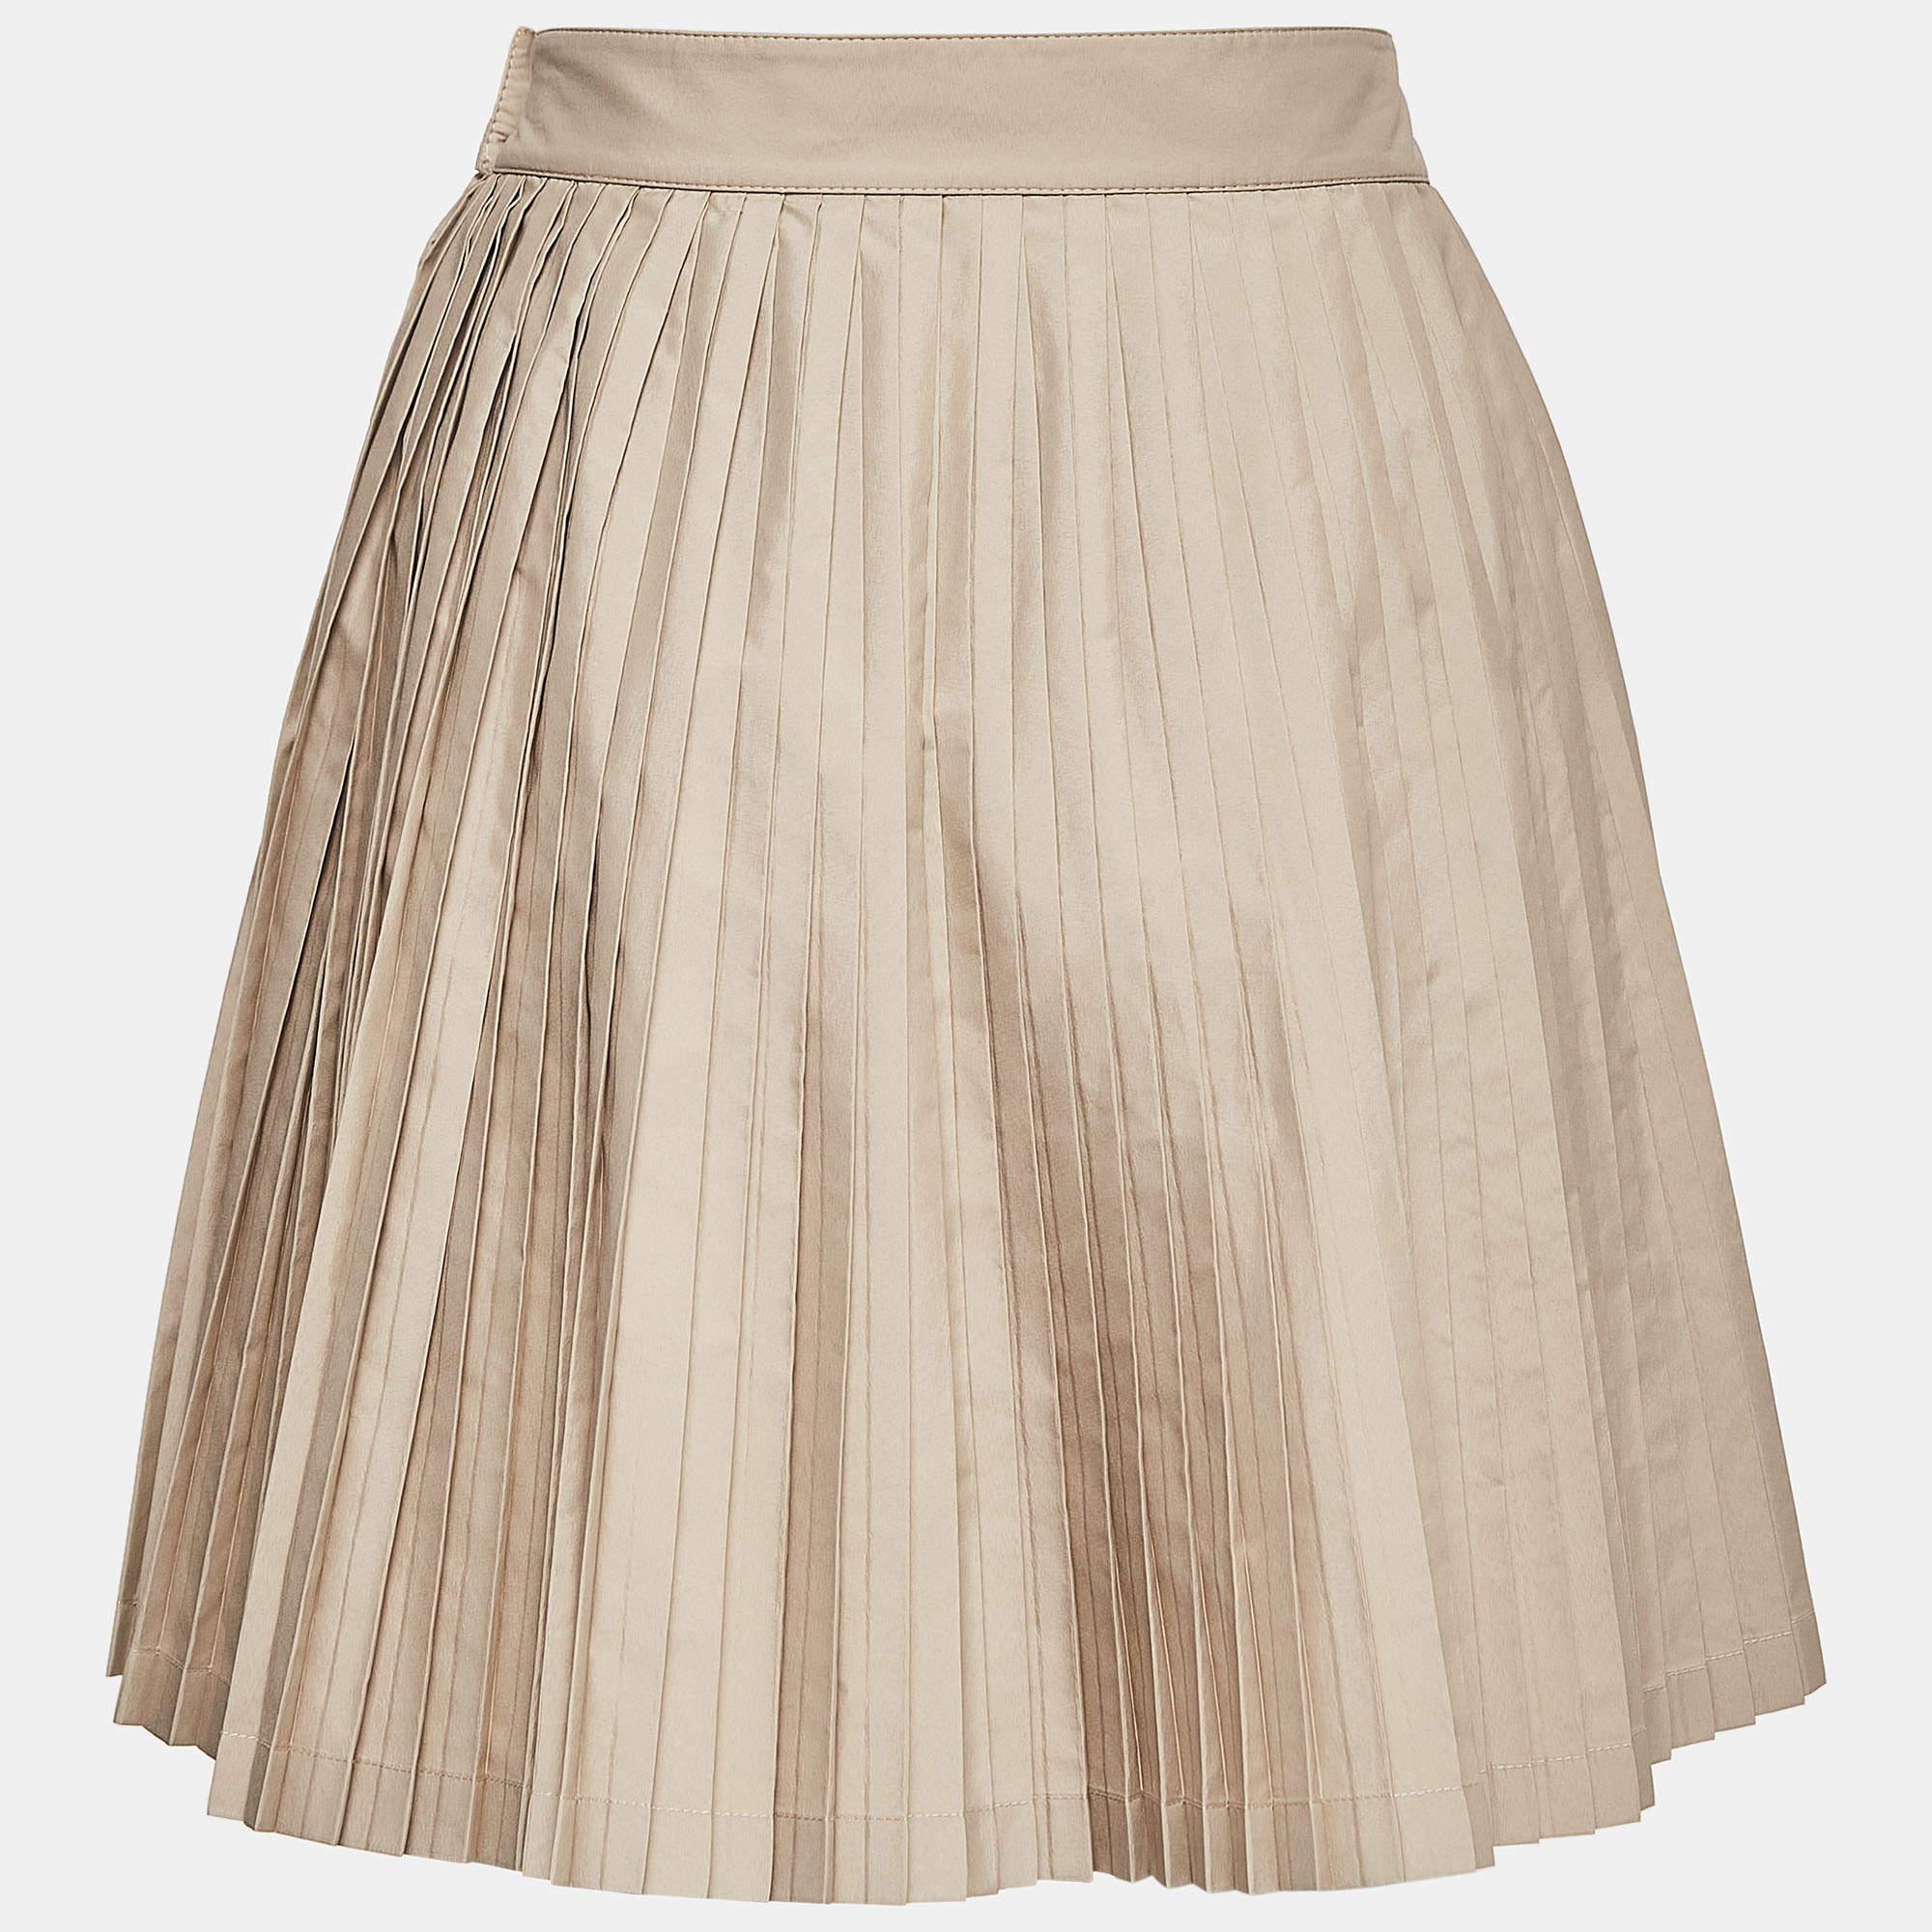 This elegant Christian Dior skirt is worth adding to your closet! Crafted from fine materials, it is exquisitely designed into a flattering shape.

